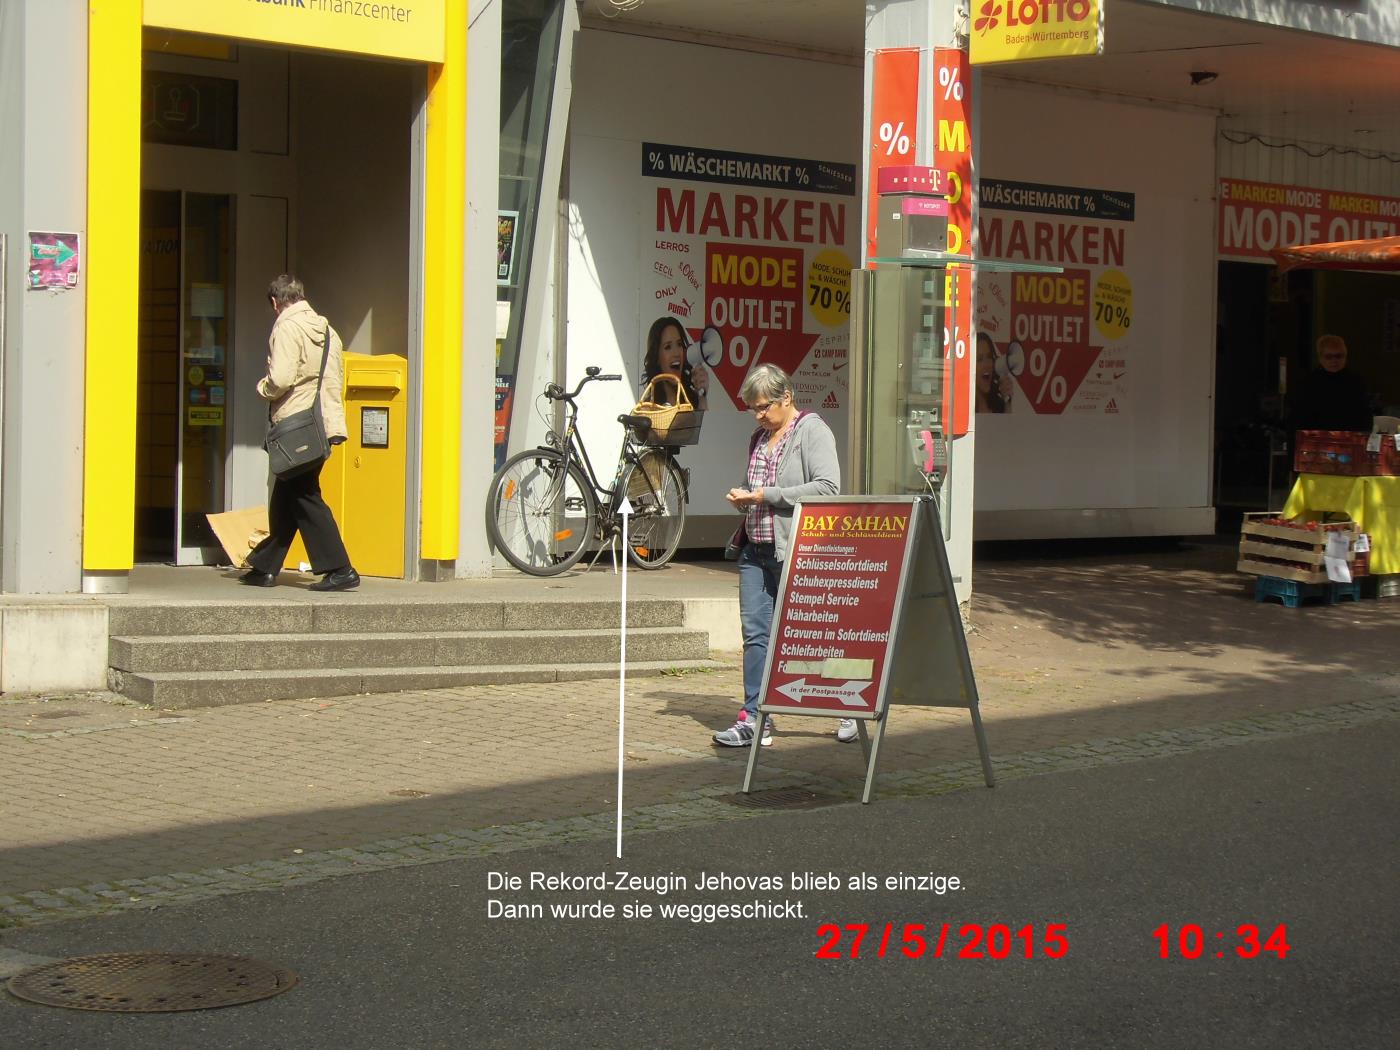 The tactics of Jehovah's Witnesses in Wiesloch